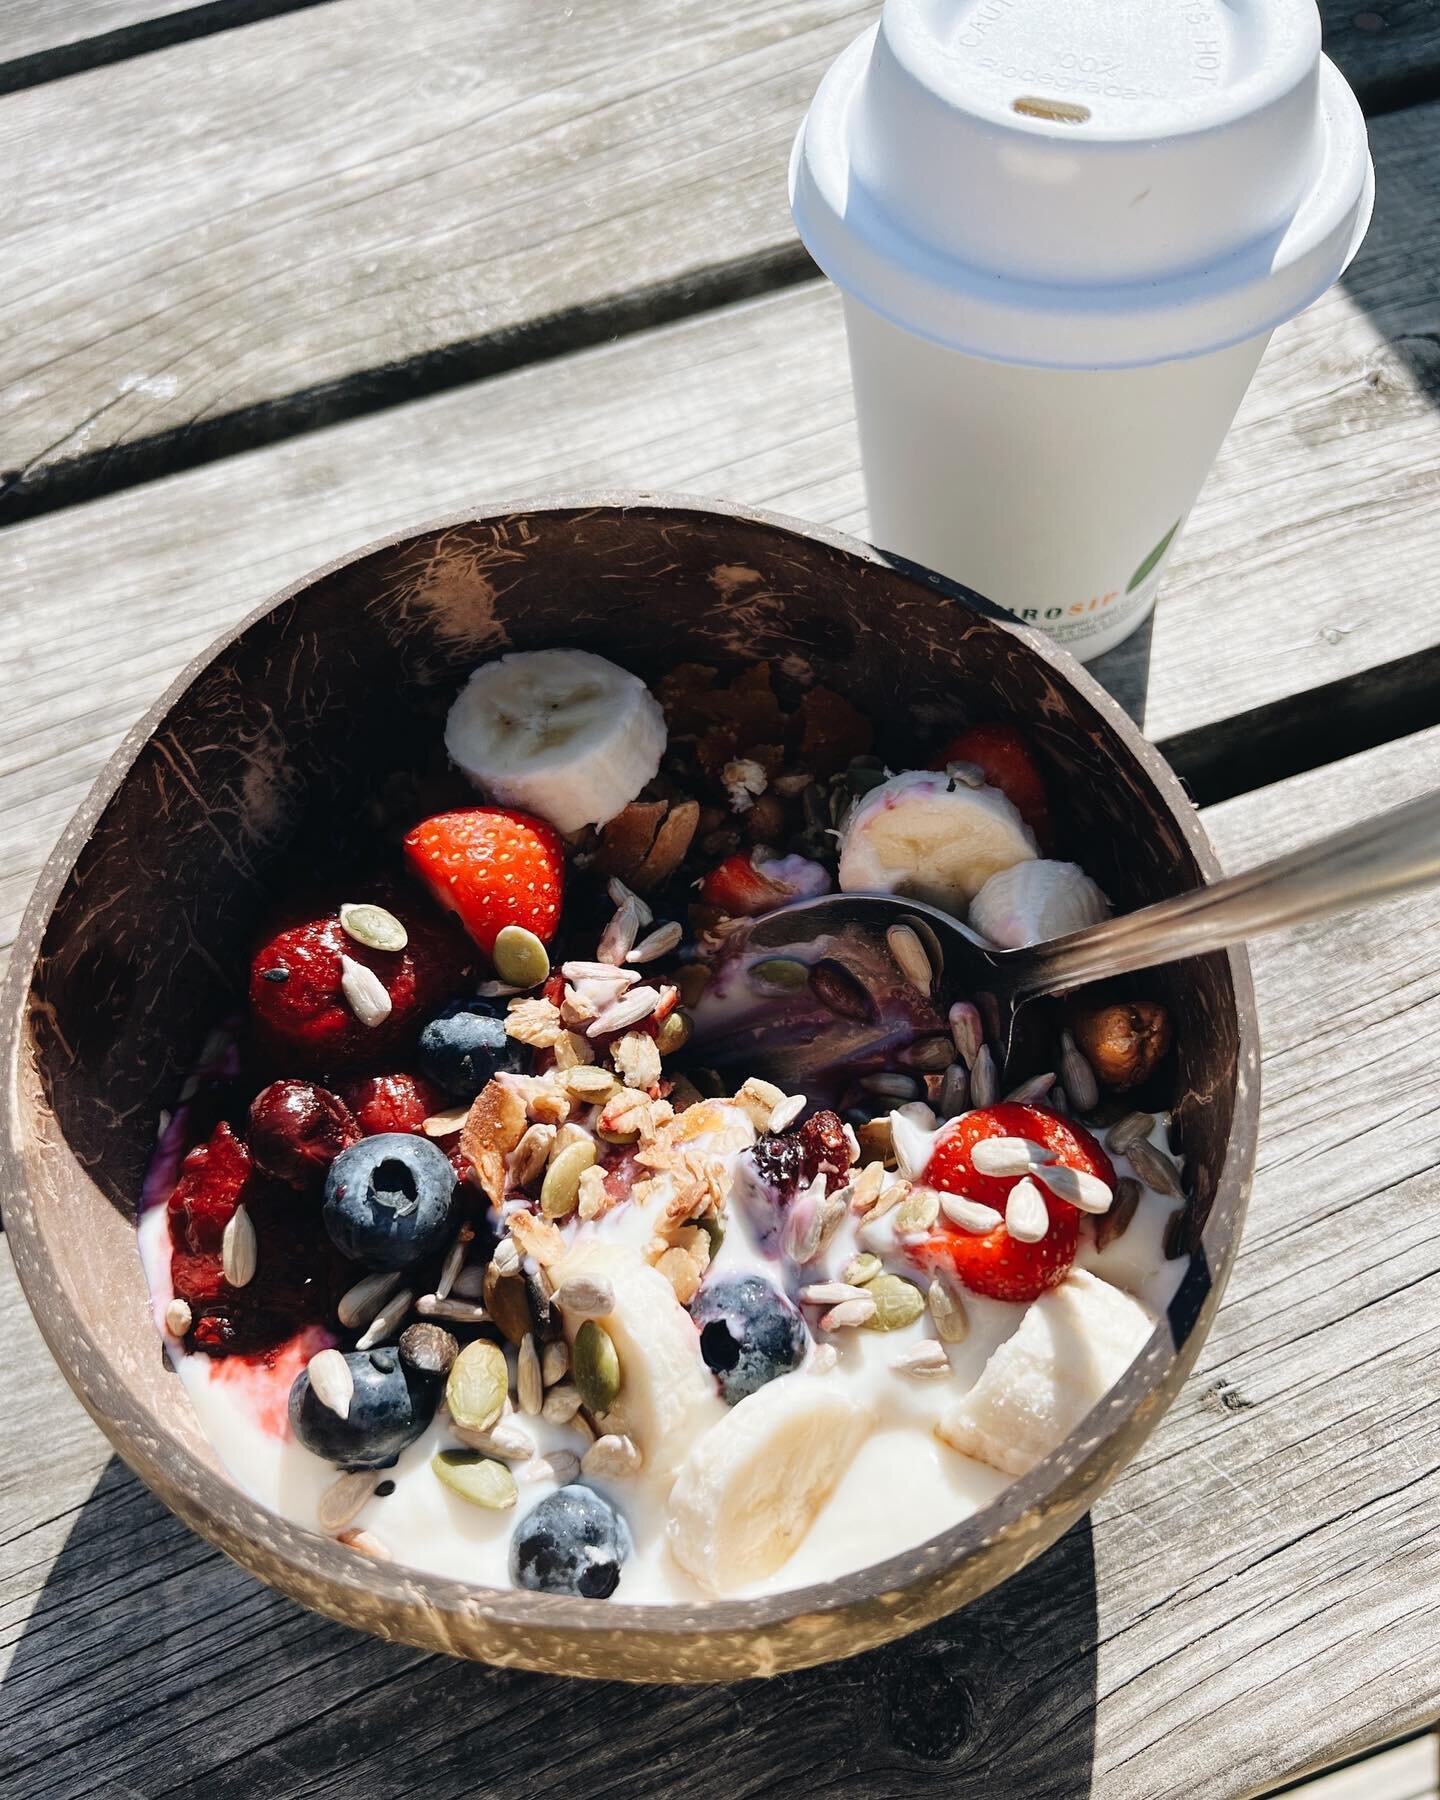 Yummy, healthy breakfast in the sunshine at the brilliant @godrevybeachcafe. Favourite @yallahcoffee too👌 

A lovely walk along the beach / through the dunes from @wyndwardcornwall &amp; a perfect pit-stop ☕️